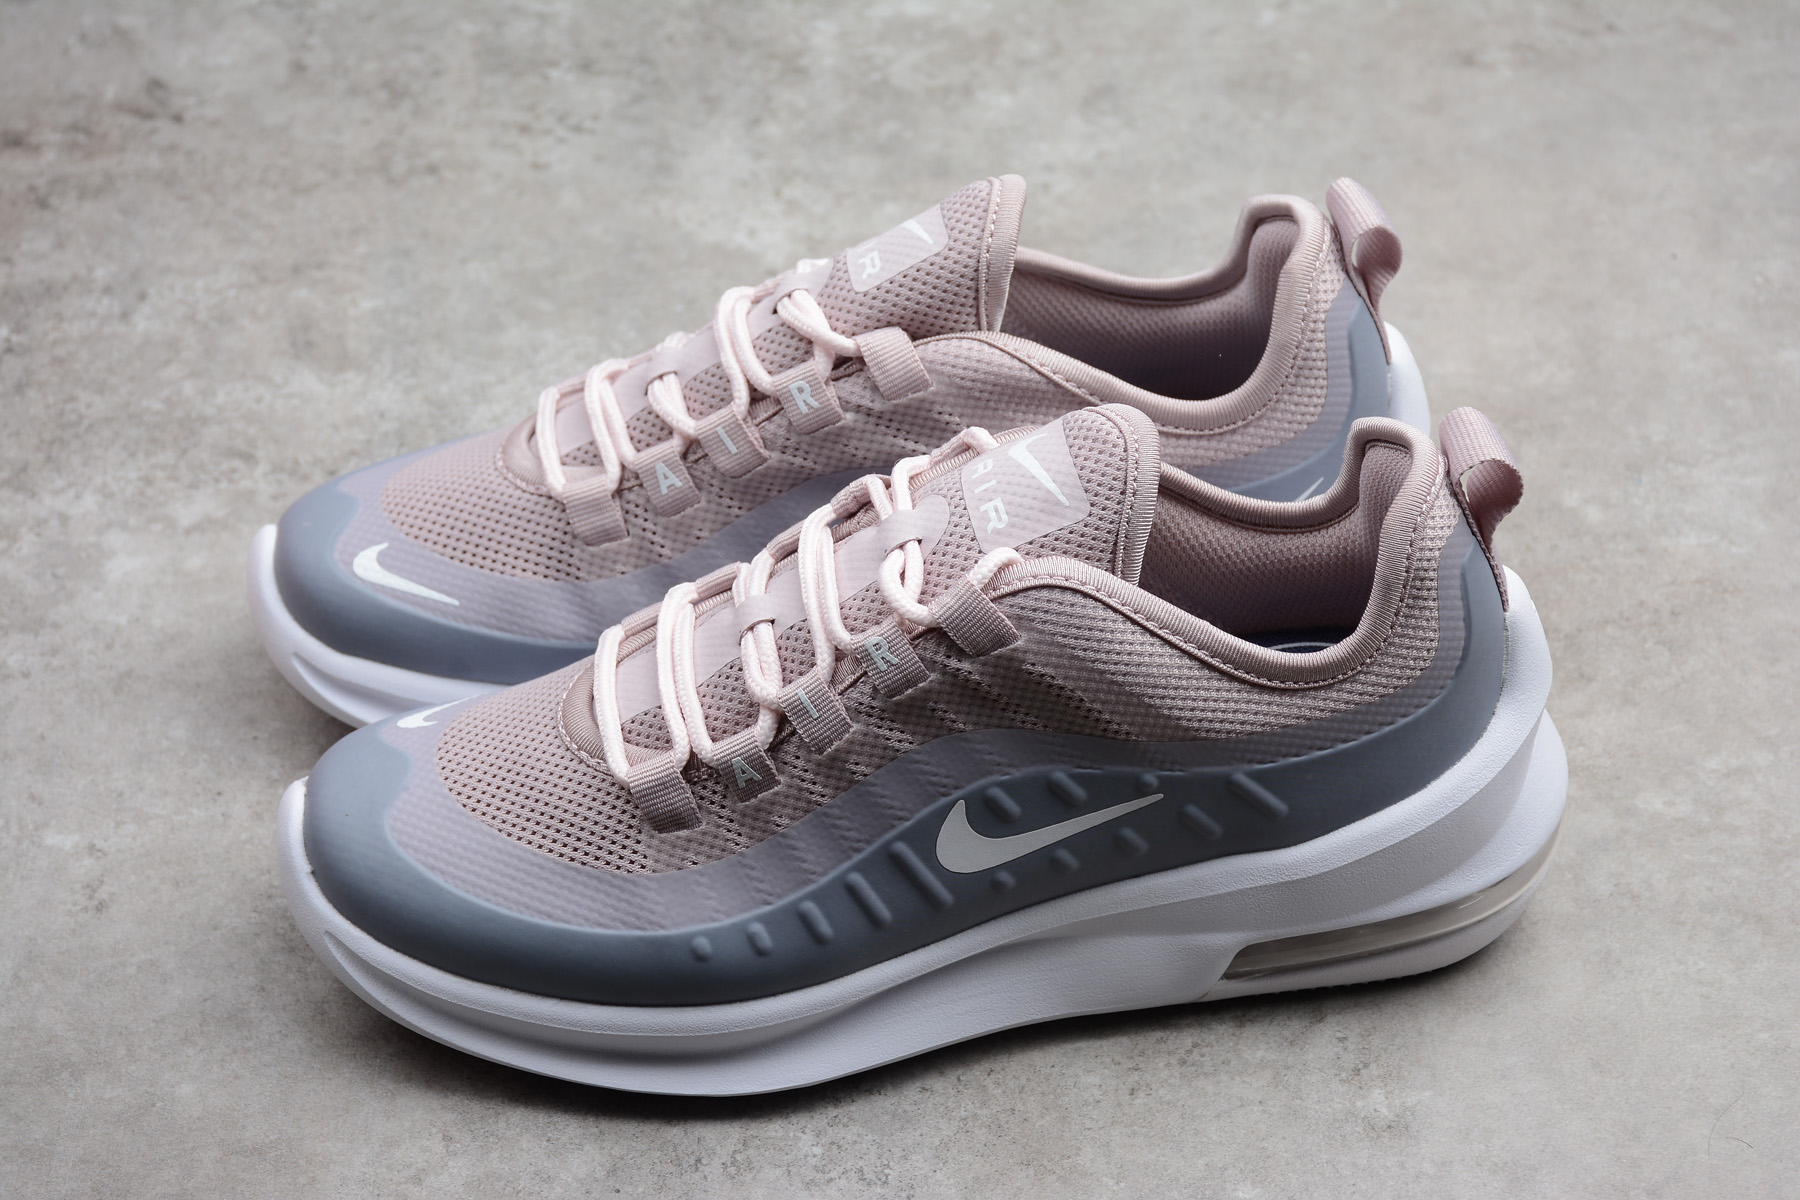 Women's Nike Air Max Axis Particle Rose 